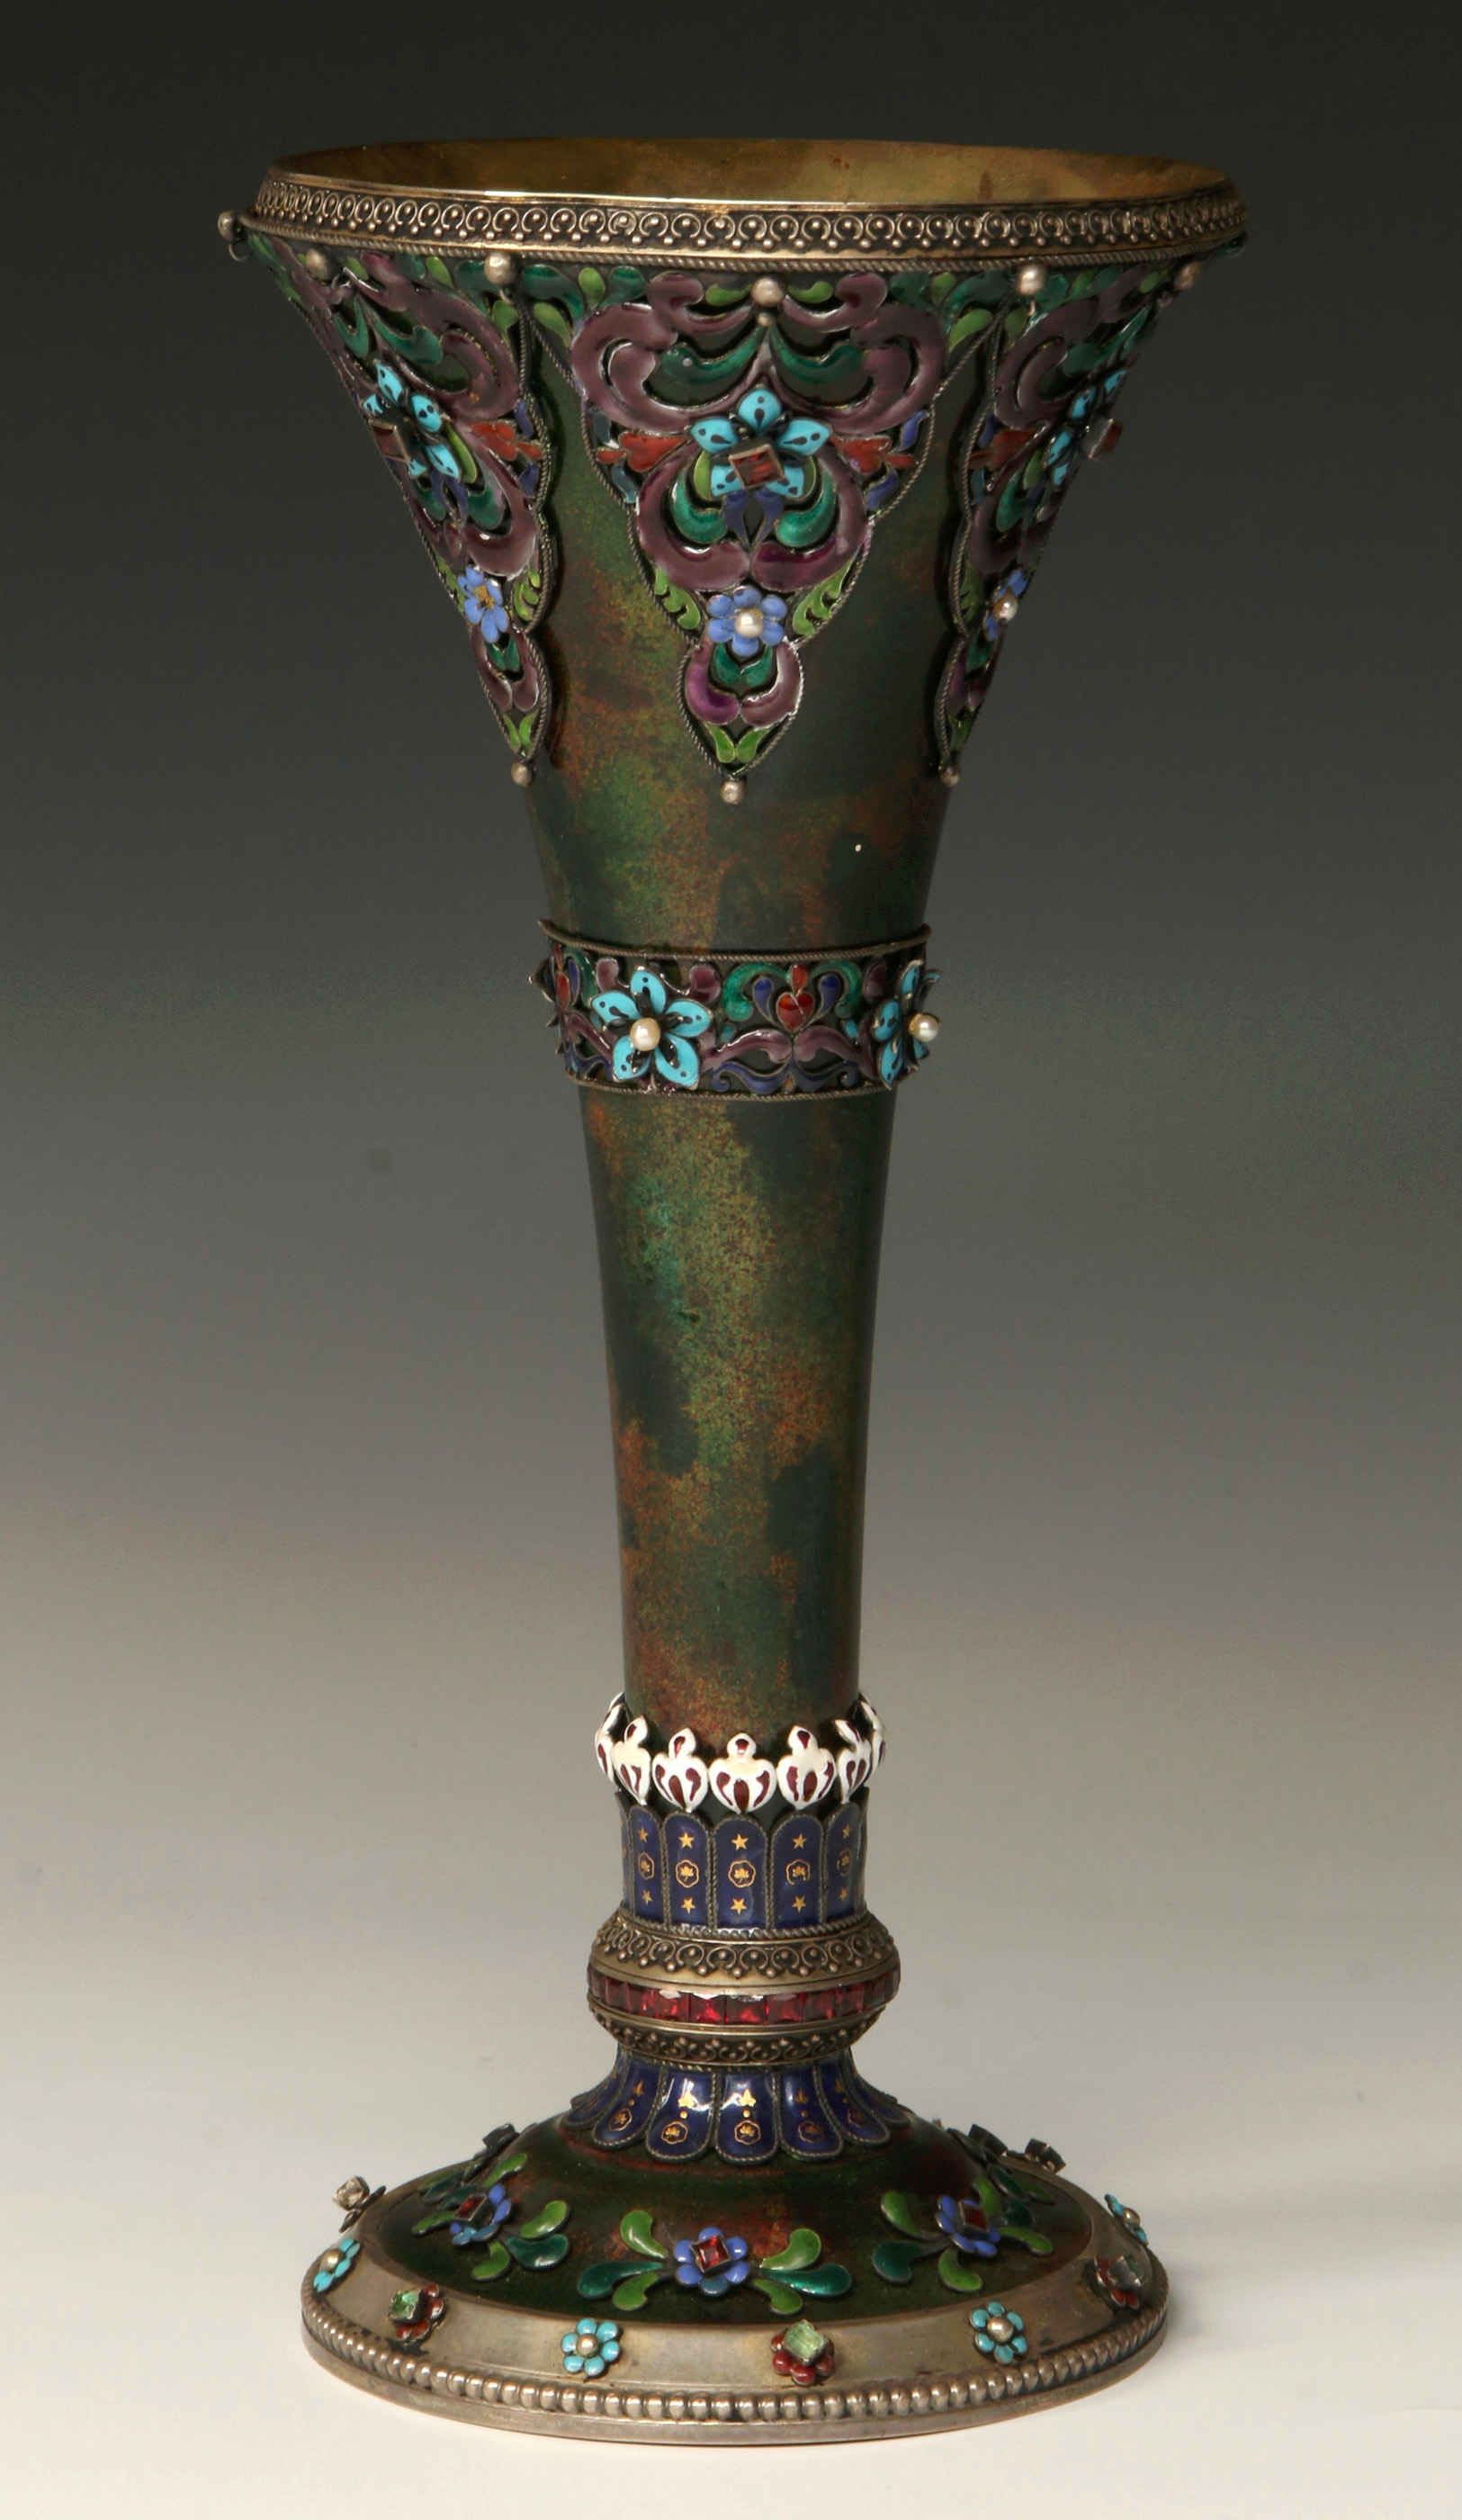 A CONTINETAL PARCEL GILT, JEWELED AND ENAMELD VASE